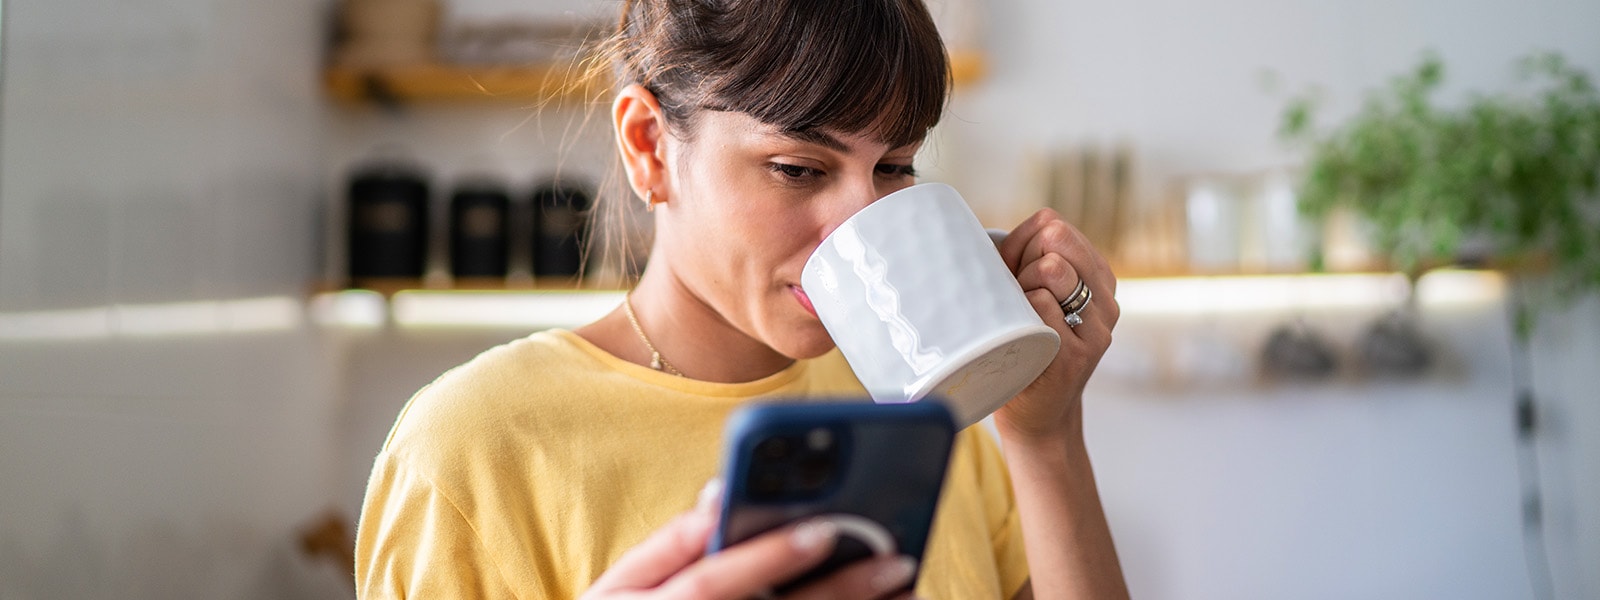 A woman drinks coffee and looks at her phone wondering what is a third party app.